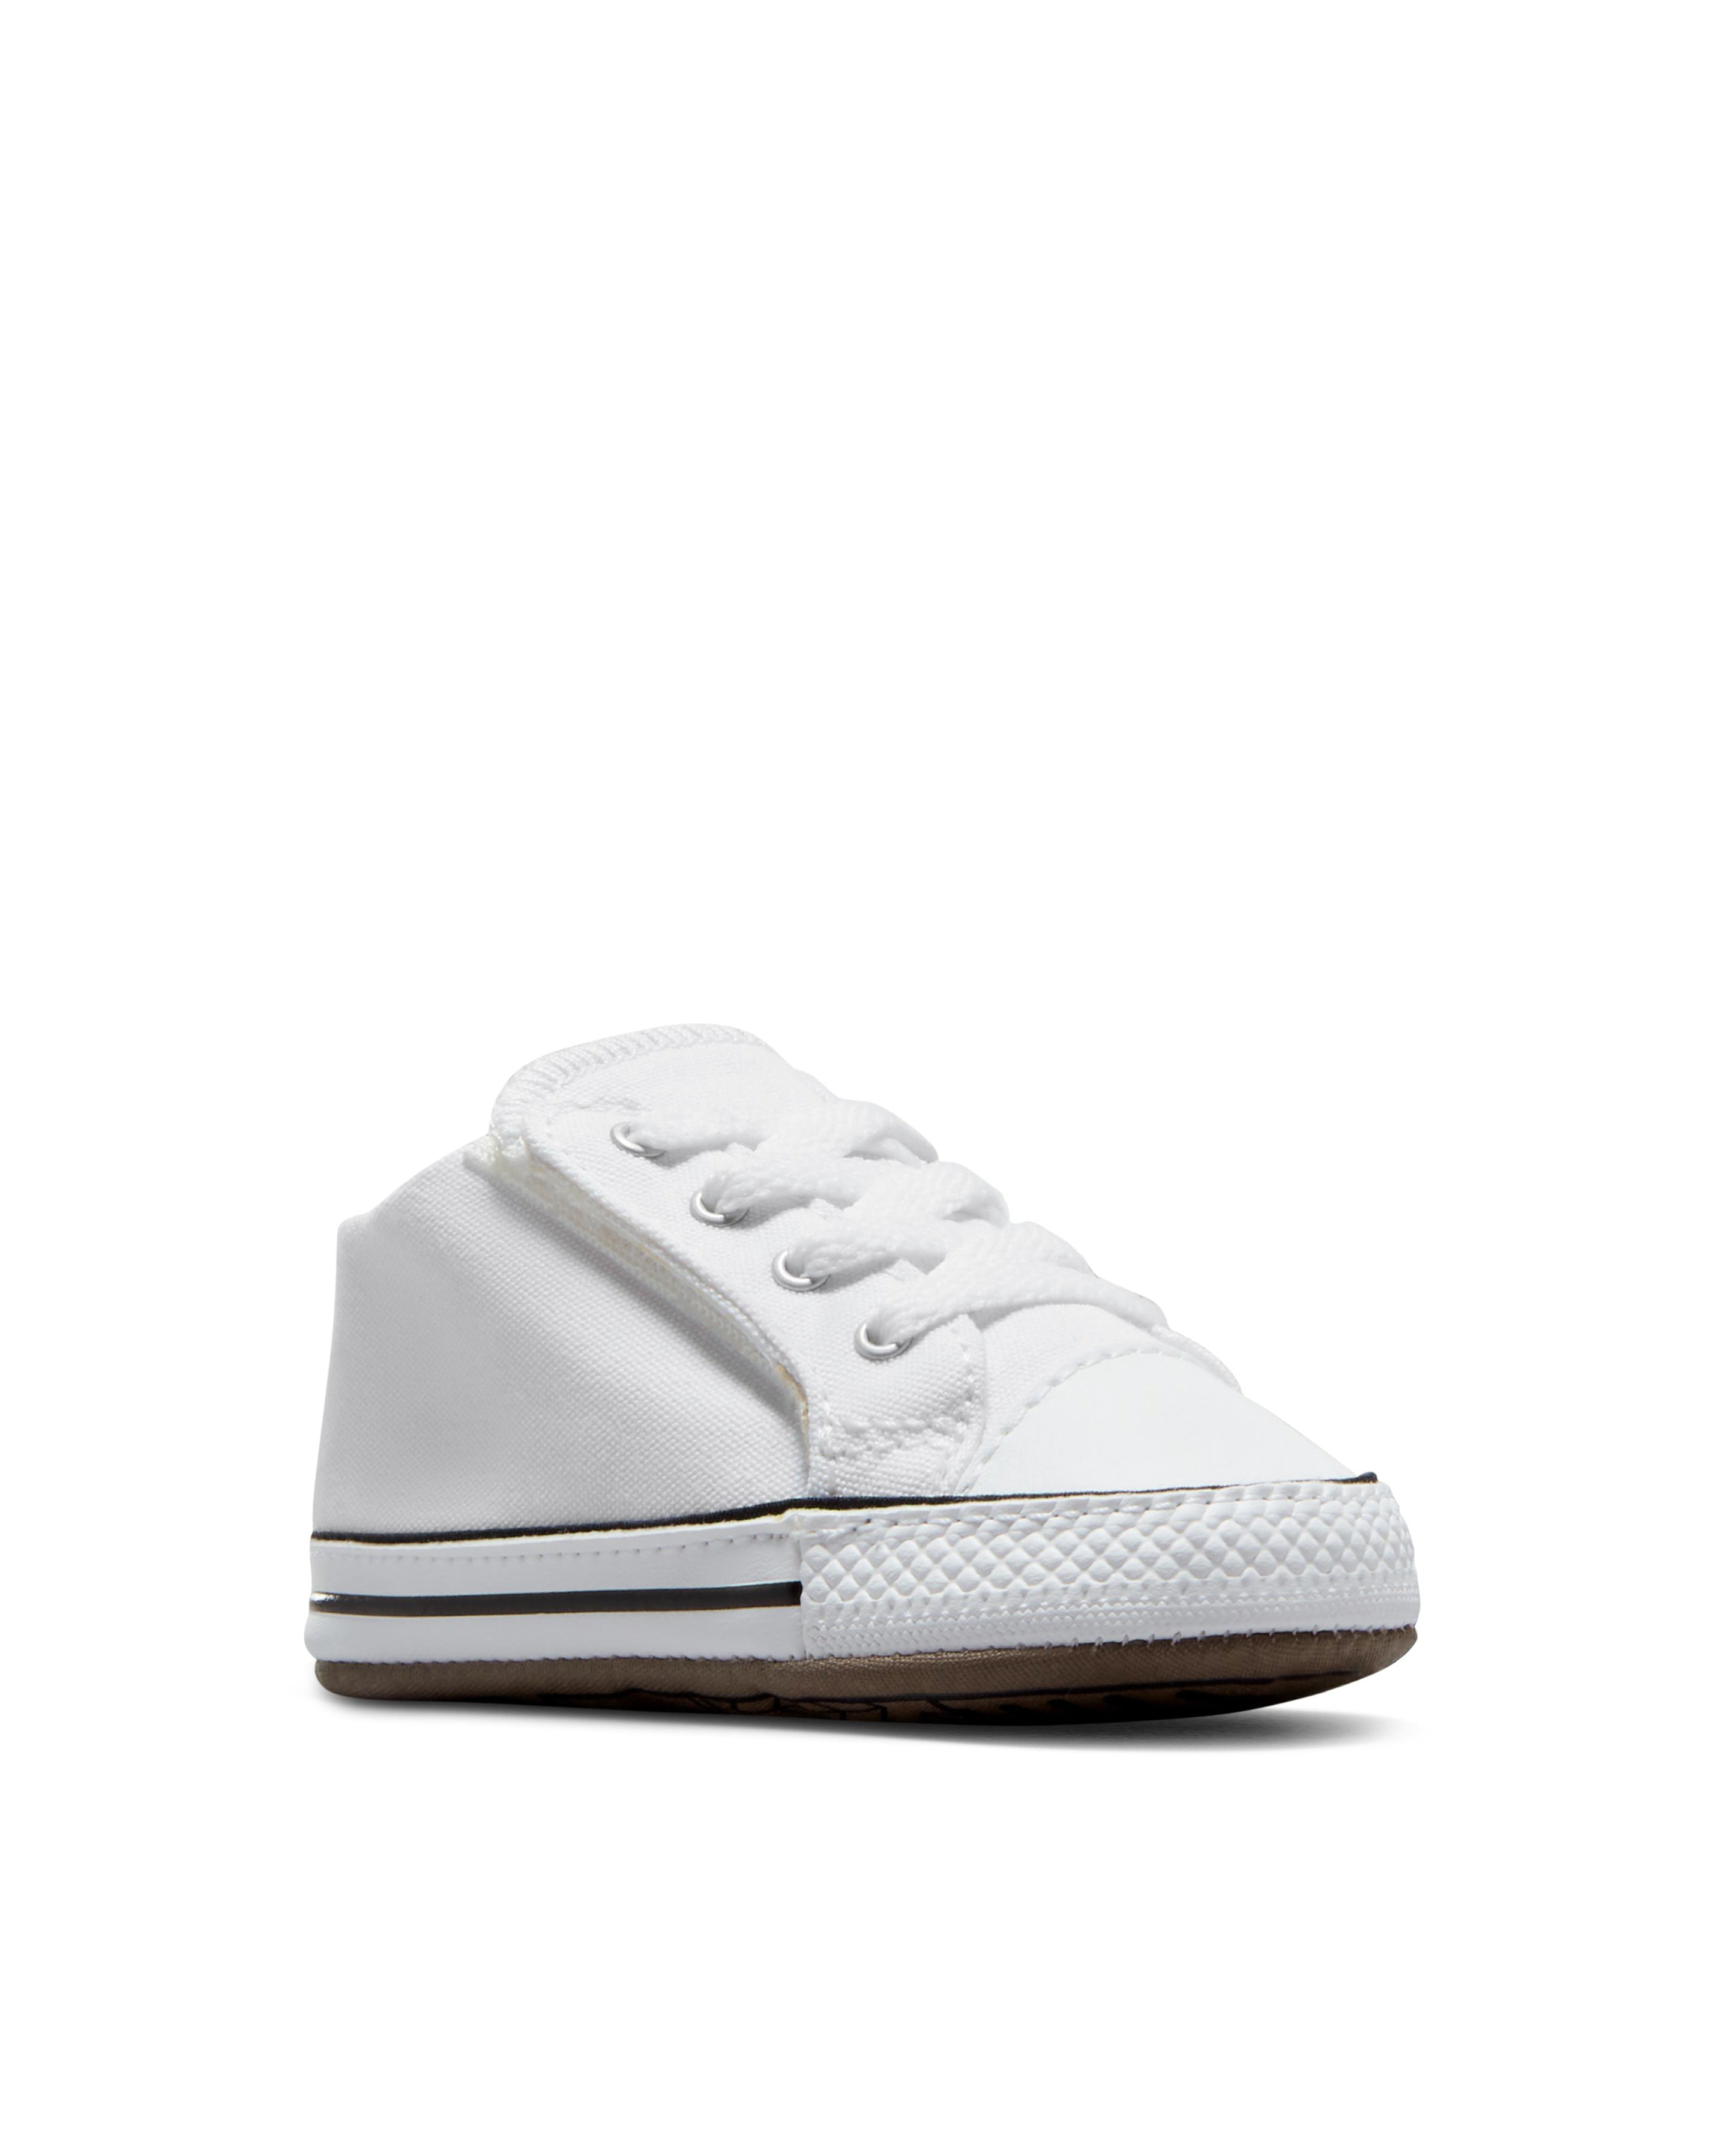 Converse Chuck Taylor Canvas Cribster Infants - White/Natural Ivory/White